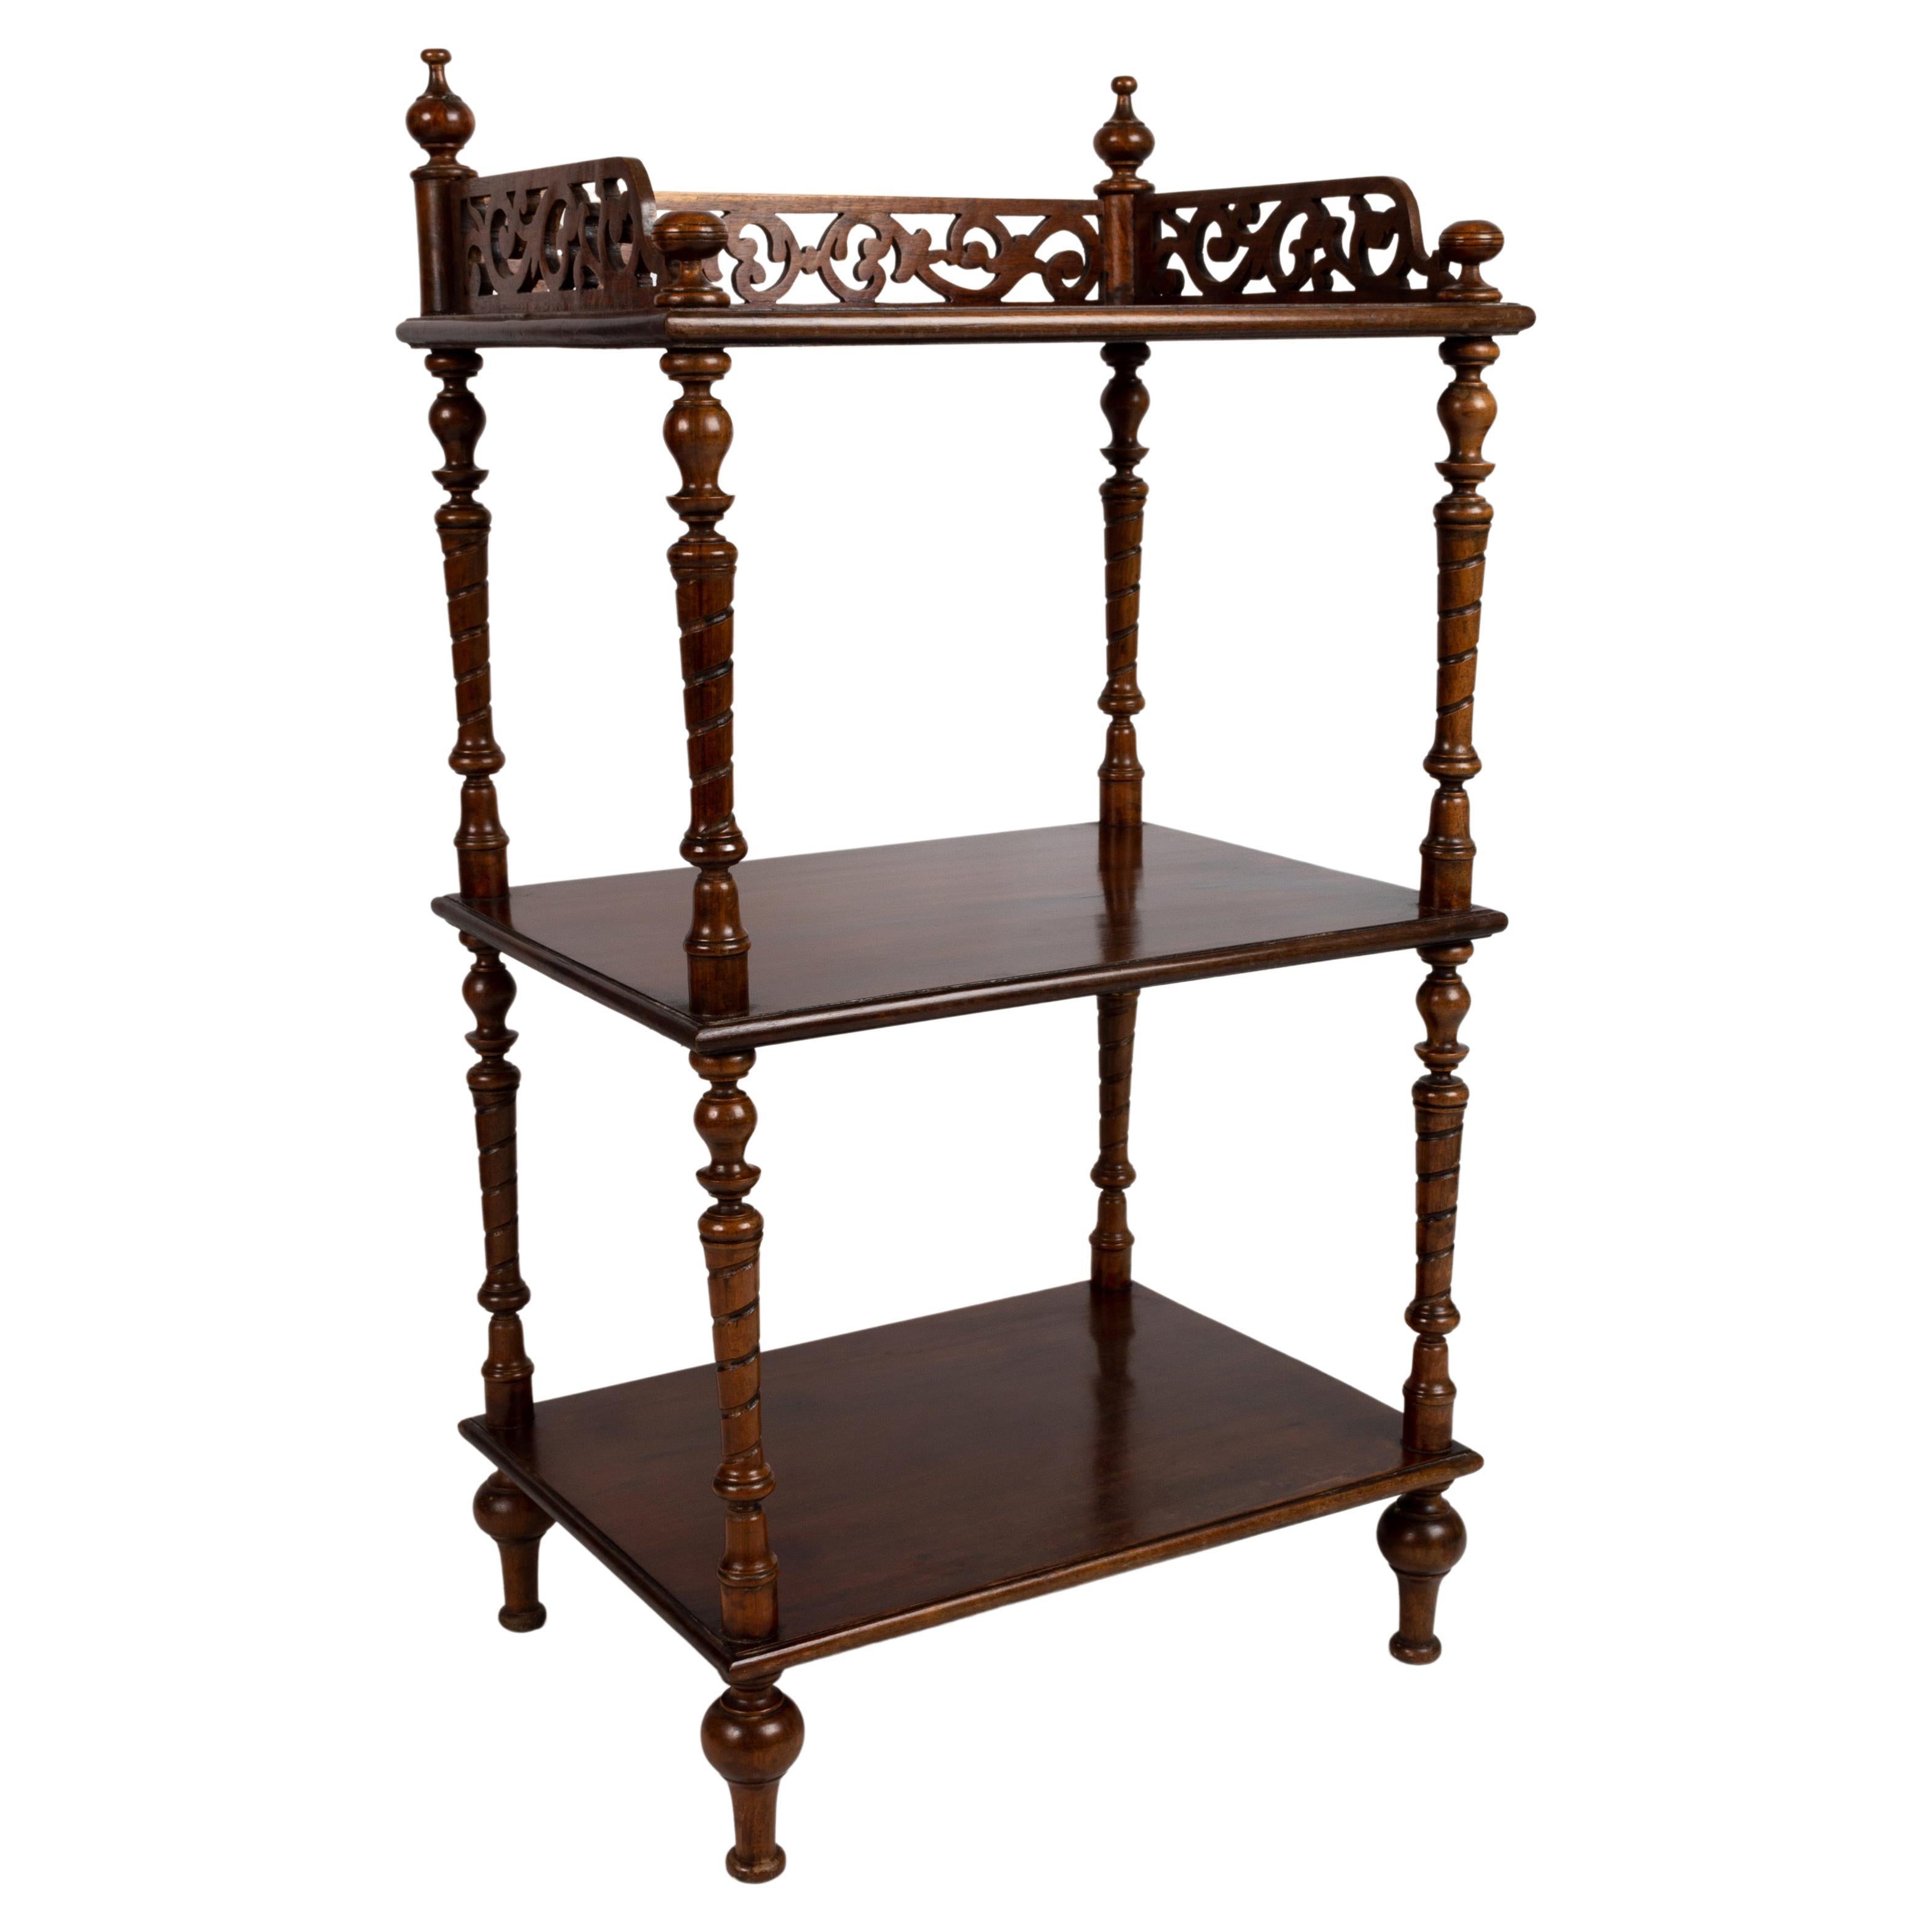 Antique English Victorian Carved Mahogany Whatnot Etagere Shelves C.1880 For Sale